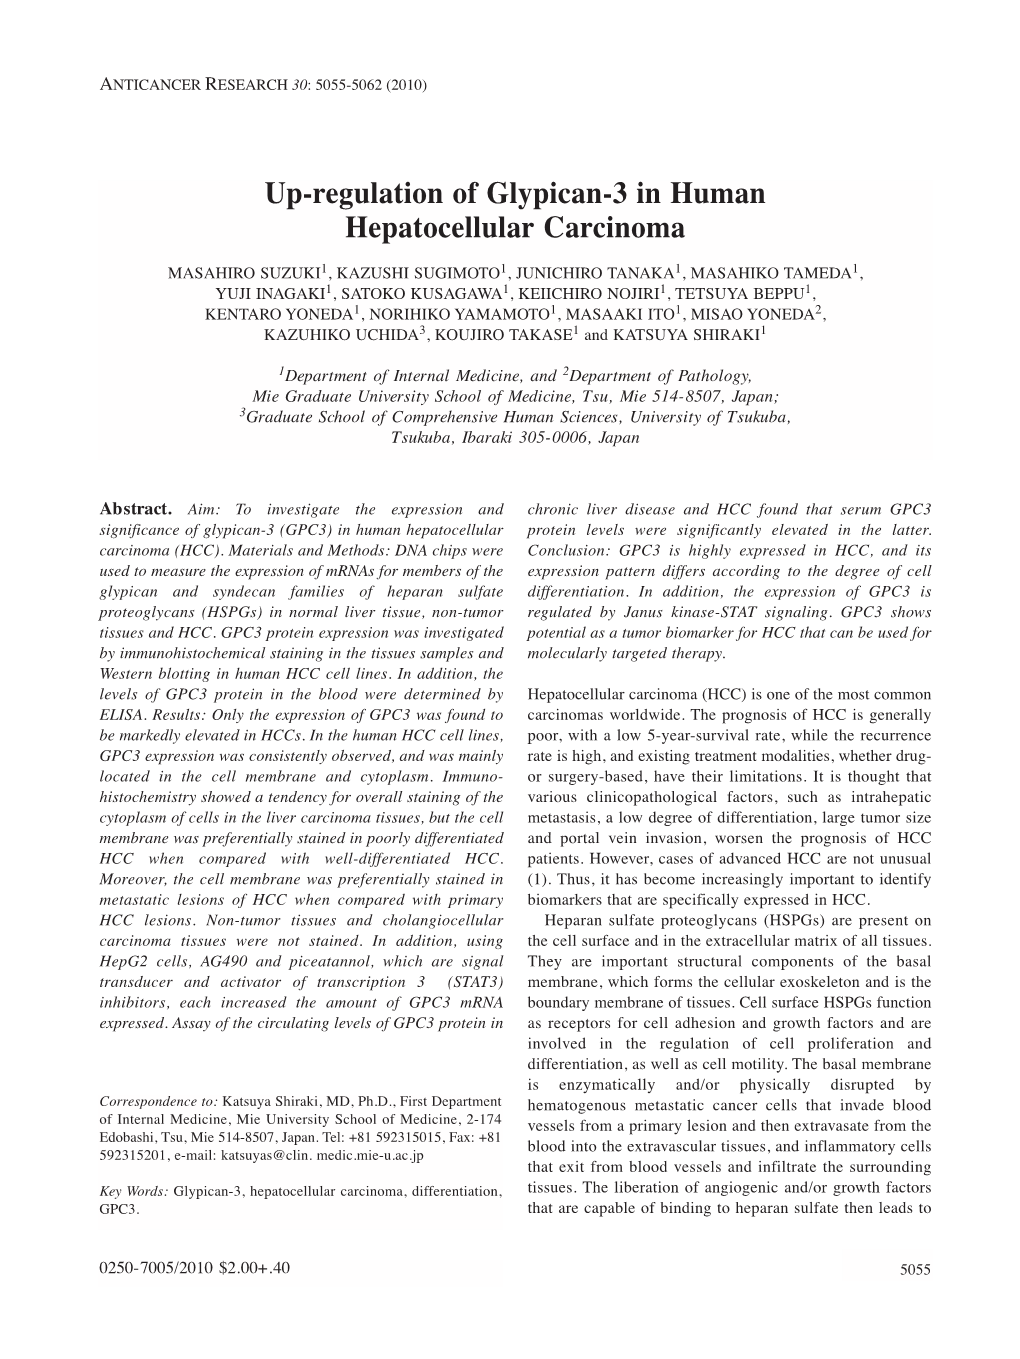 Up-Regulation of Glypican-3 in Human Hepatocellular Carcinoma